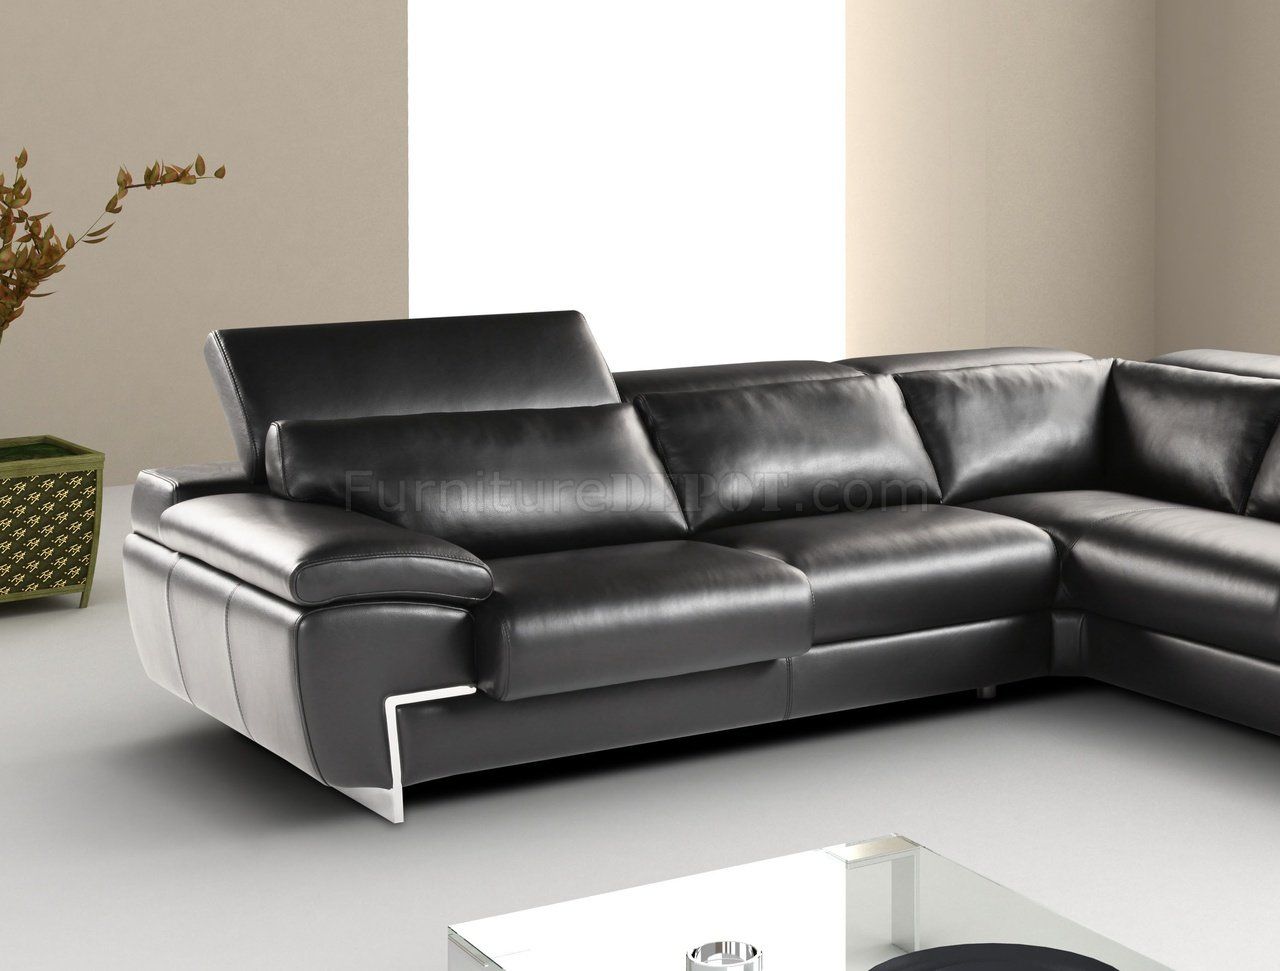 Black Full Leather Modern Sectional Sofa W/Adjustable Headrest Regarding Wynne Contemporary Sectional Sofas Black (View 12 of 15)